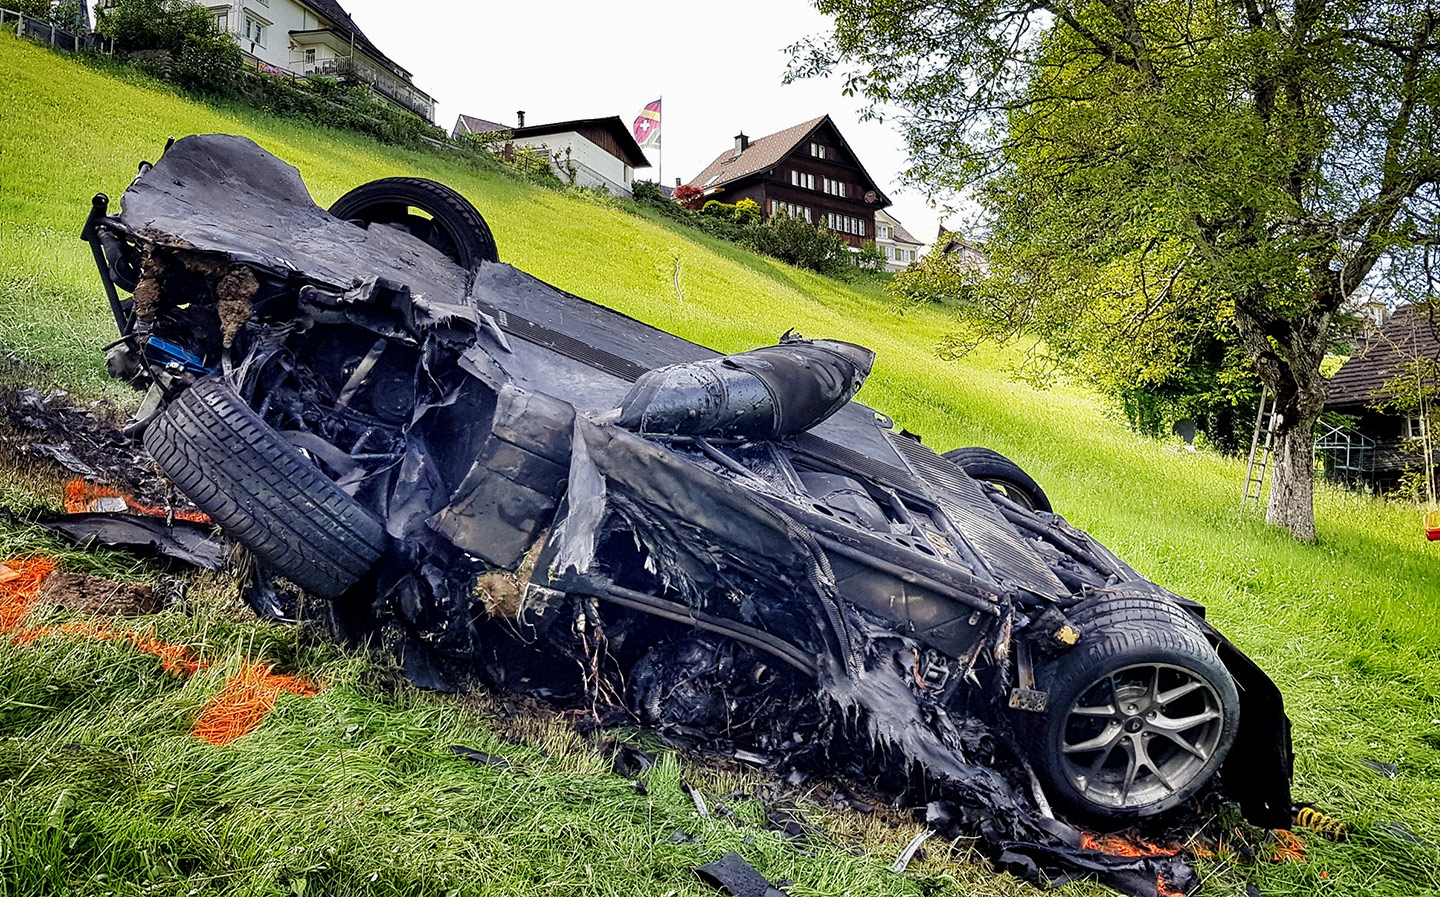 Rimac Concept_One burnt out after Richard Hammond's crash in Switzerland while filming for The Grand Tour